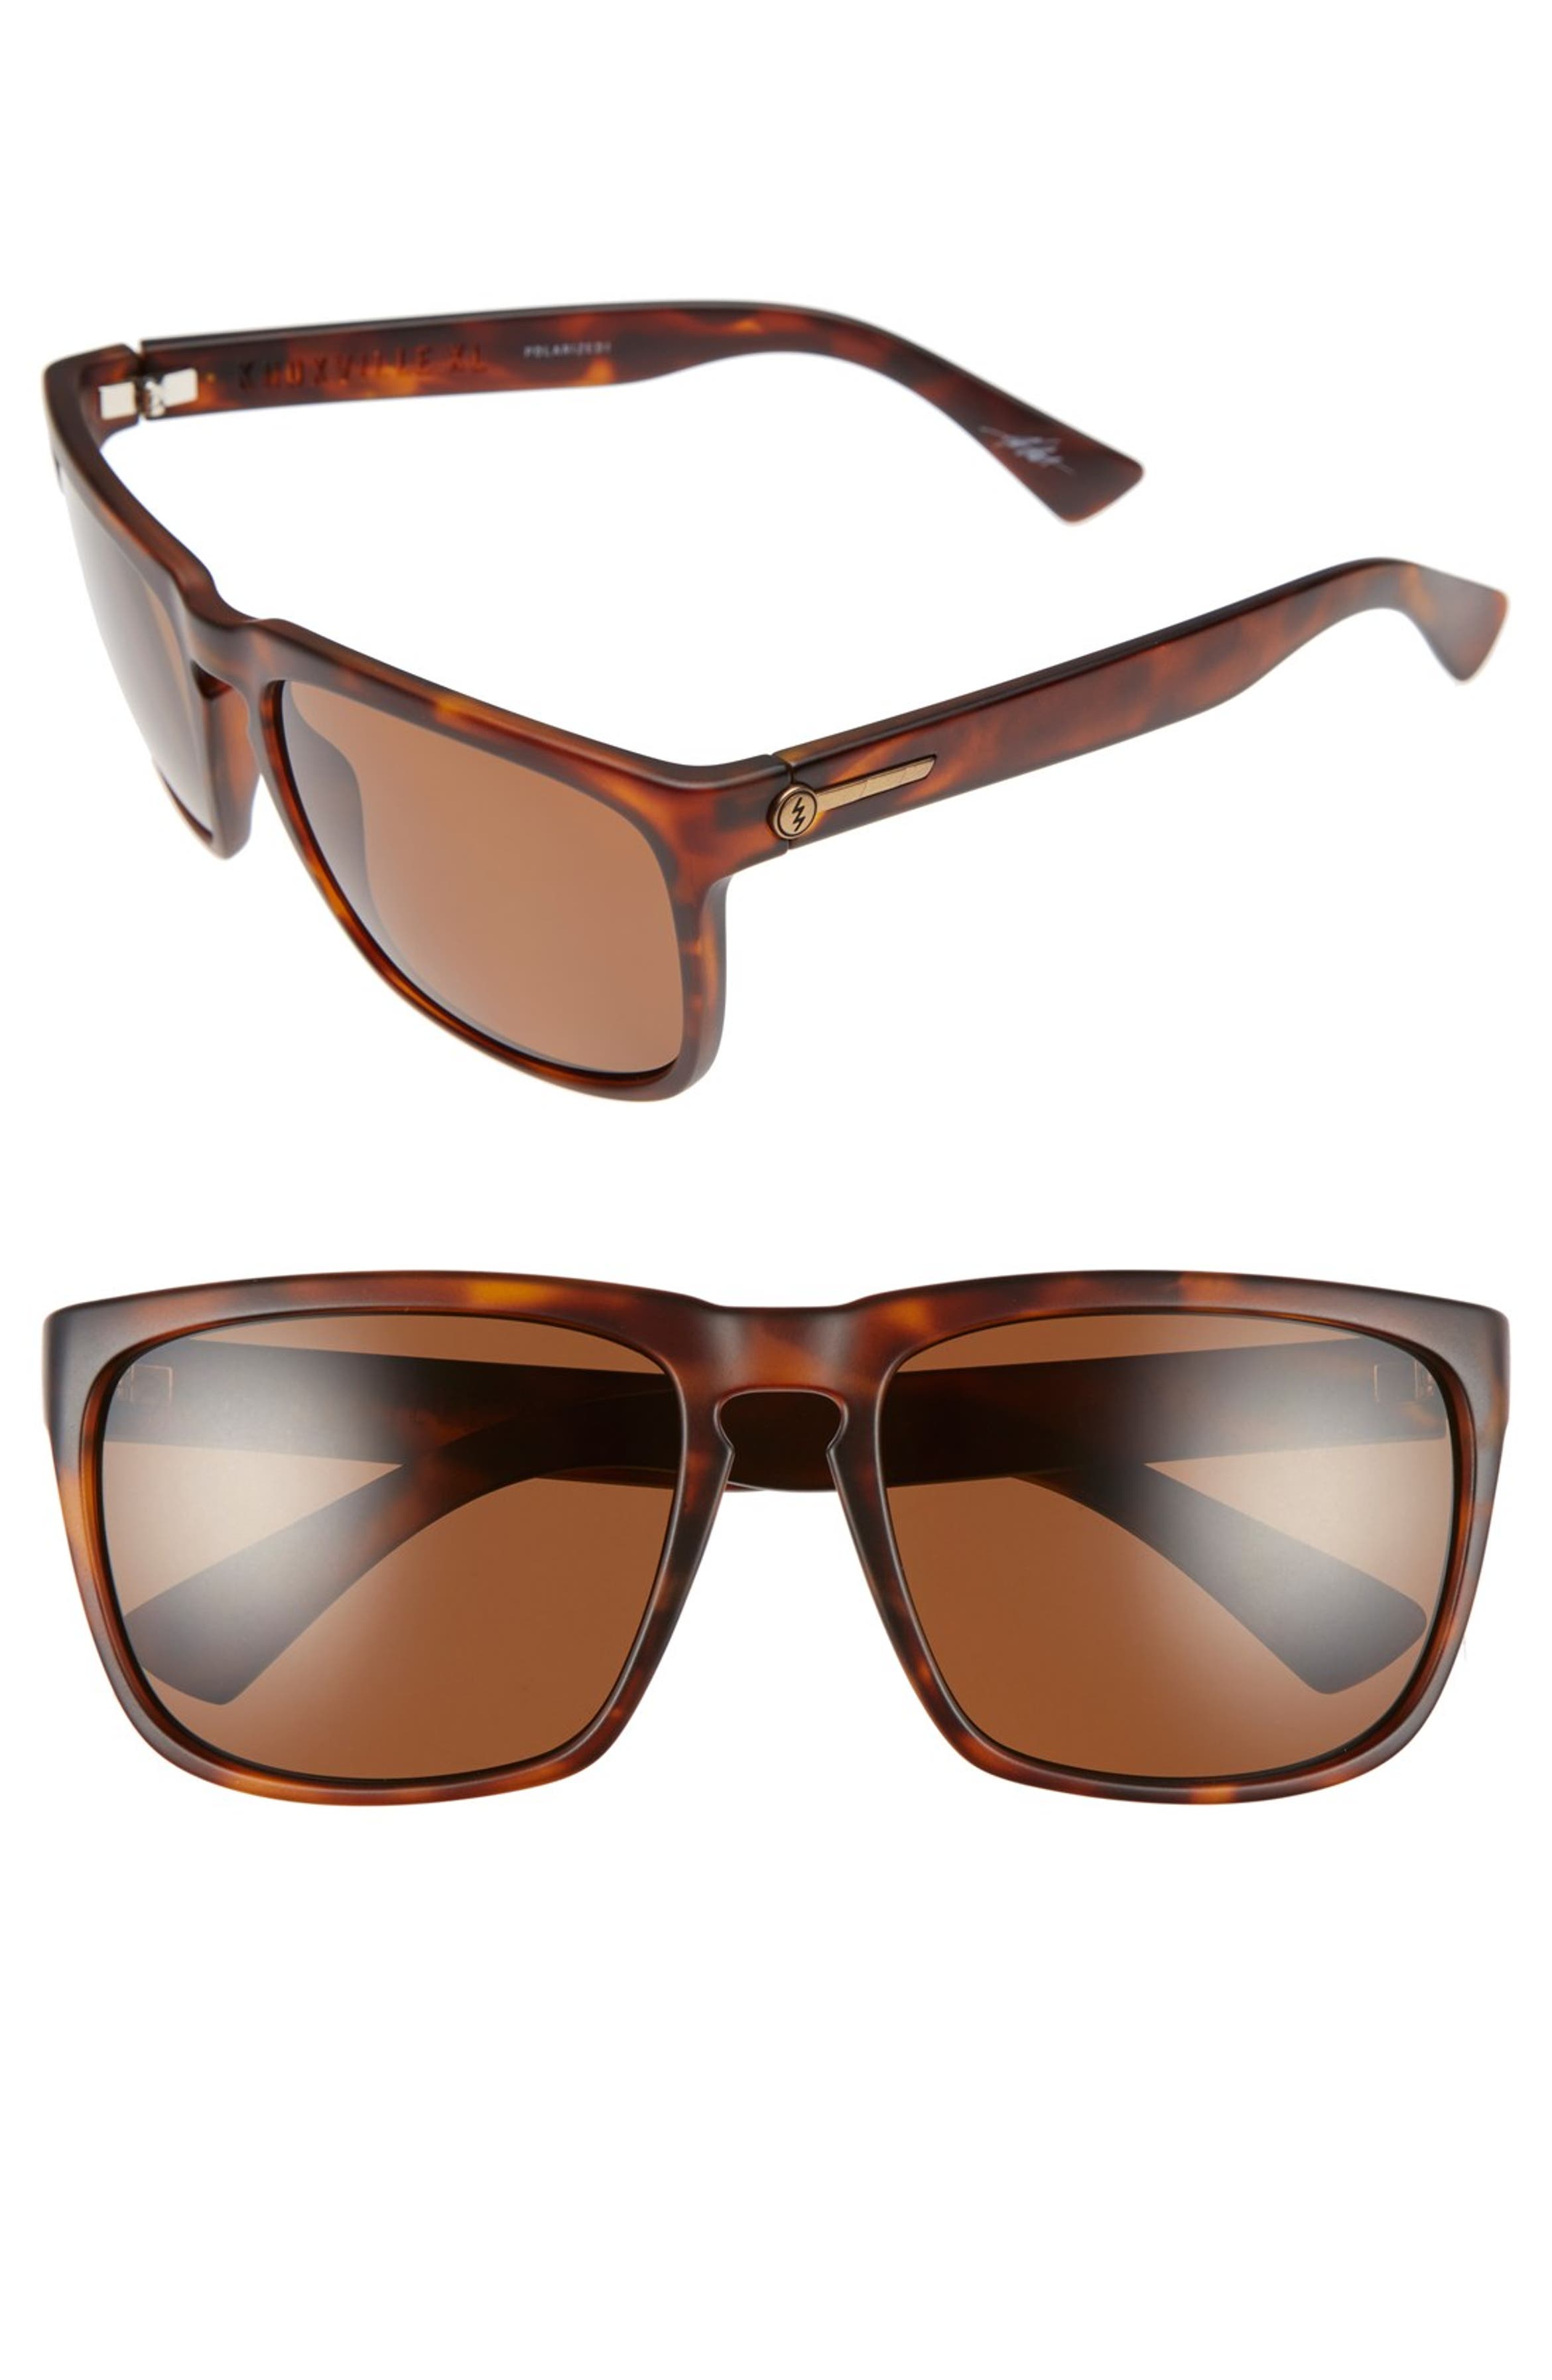 ELECTRIC 'Knoxville XL' 61mm Polarized Sunglasses Nordstrom